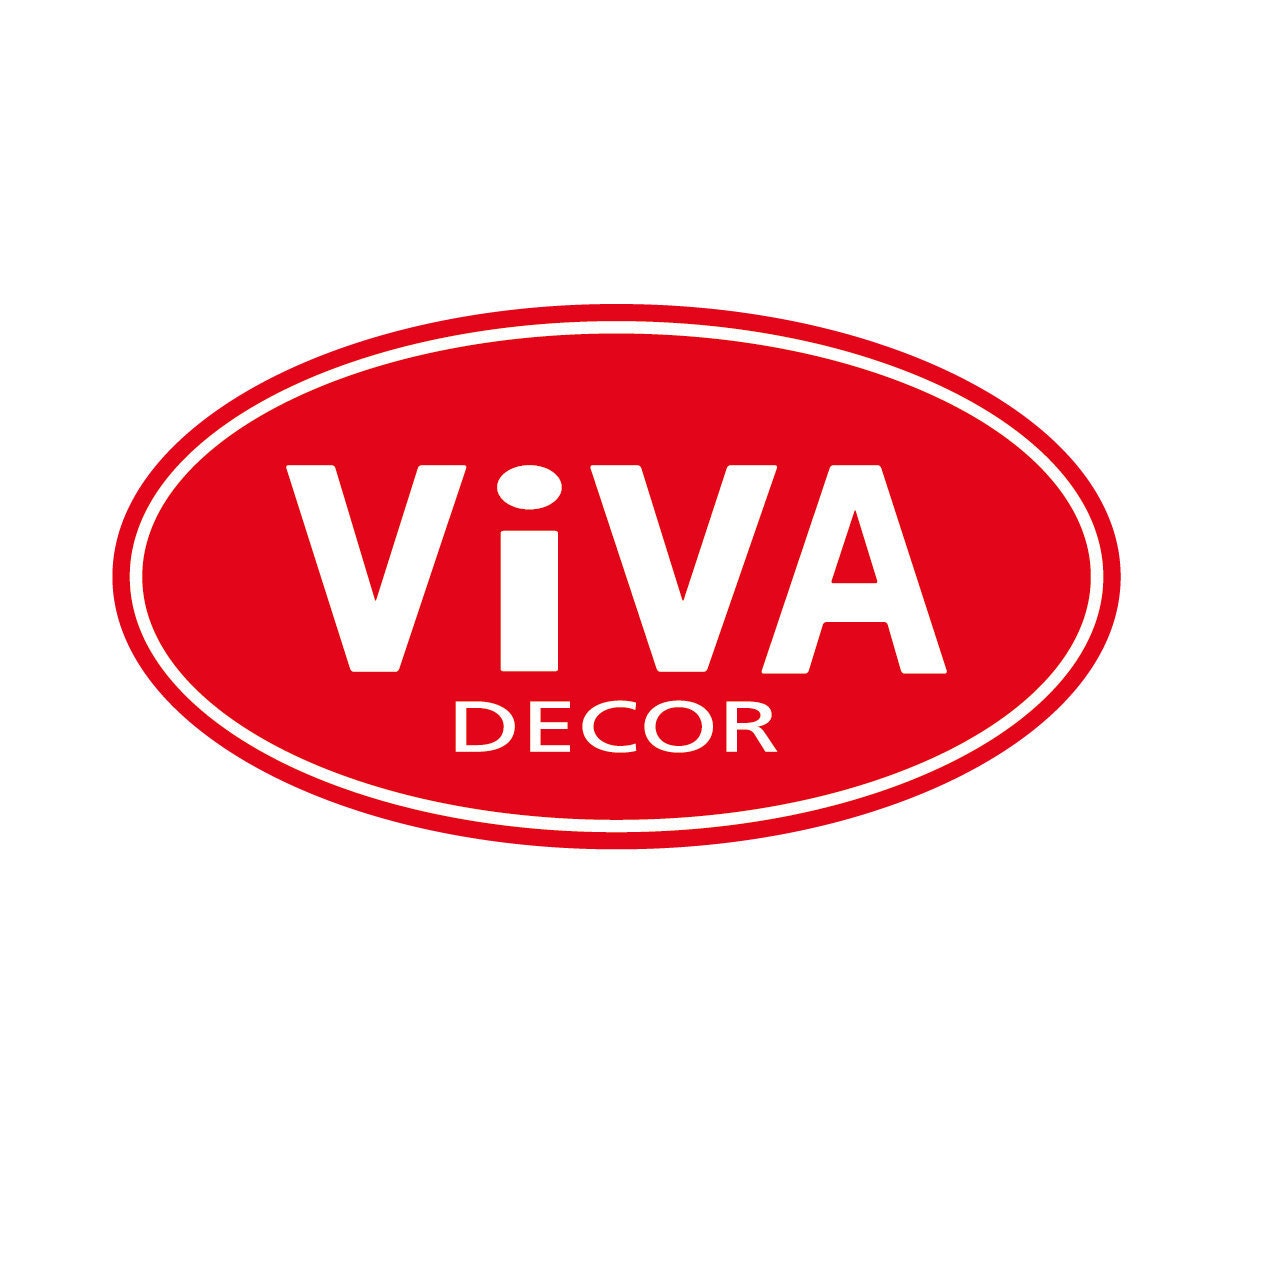 Viva Decor Abs Sock Stop Paint 82Ml-Light Green - Abs Sock Stop Paint  82Ml-Light Green . shop for Viva Decor products in India.